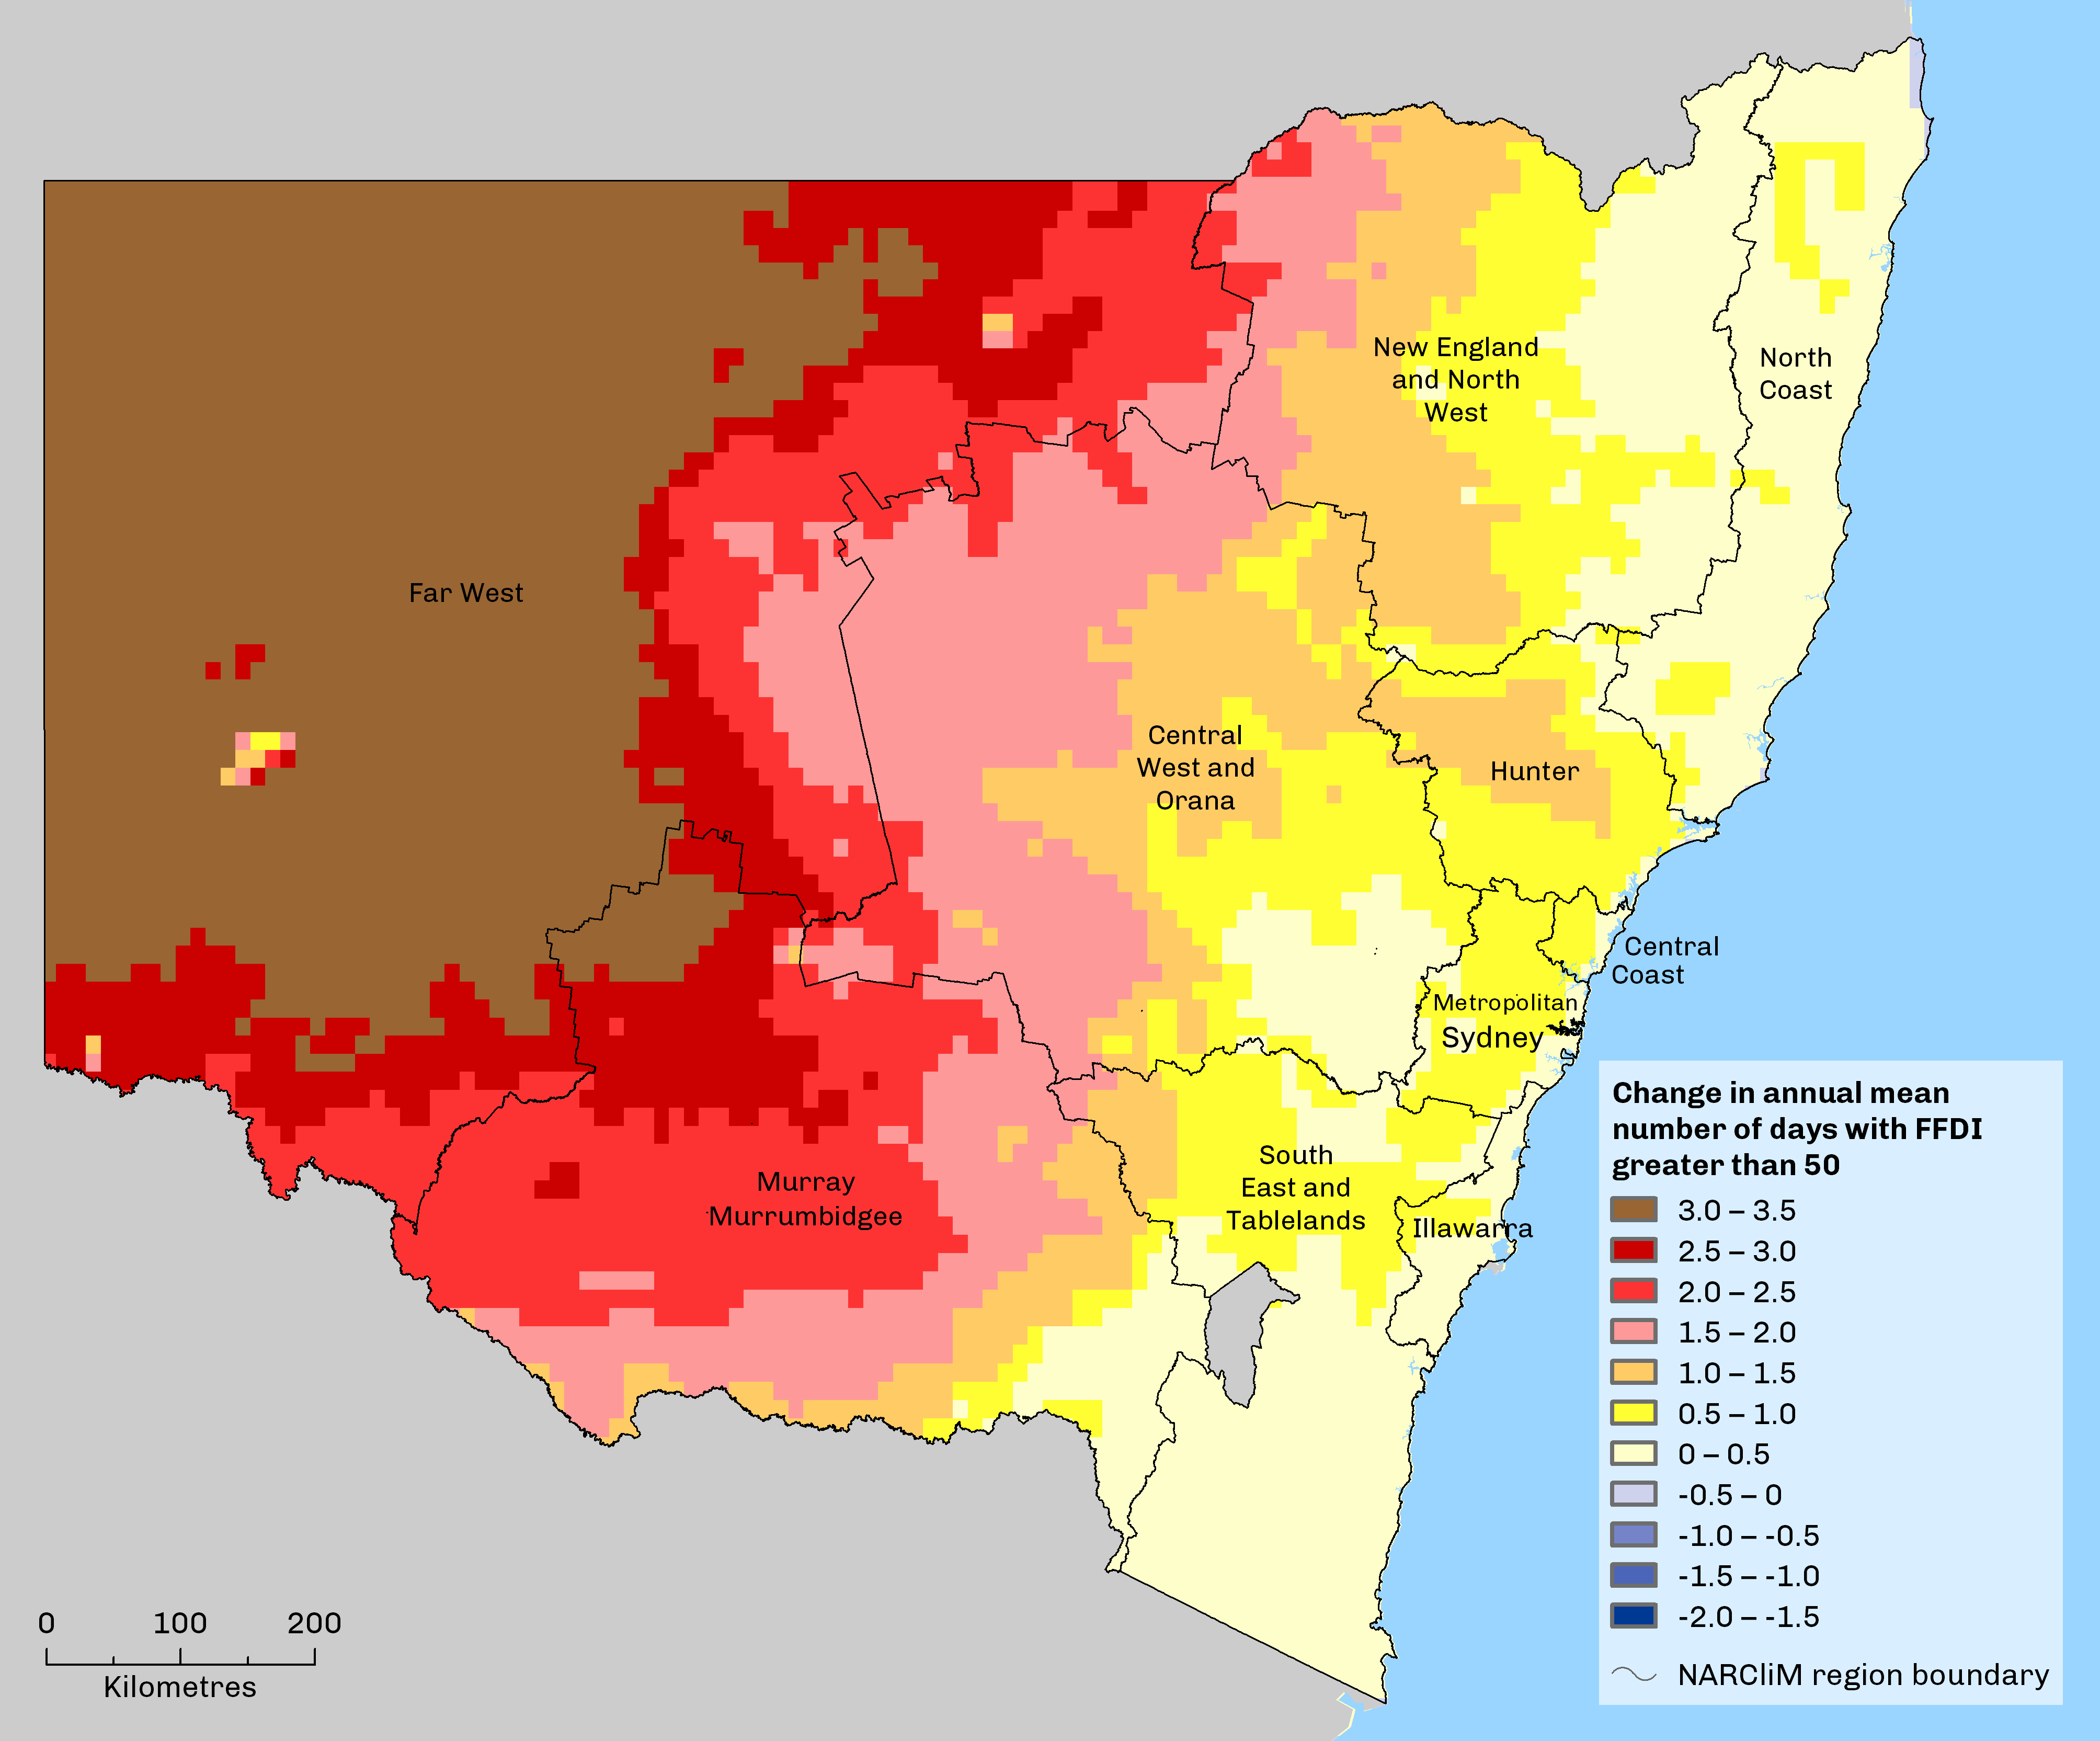 map showing change in annual mean number of days with Forest Fire Danger Index is greater than 50. Map shows that there is a greater increase in central NSW (greater than 3.5 additional days) with a lower increase along the coast (additional 0-1 days)